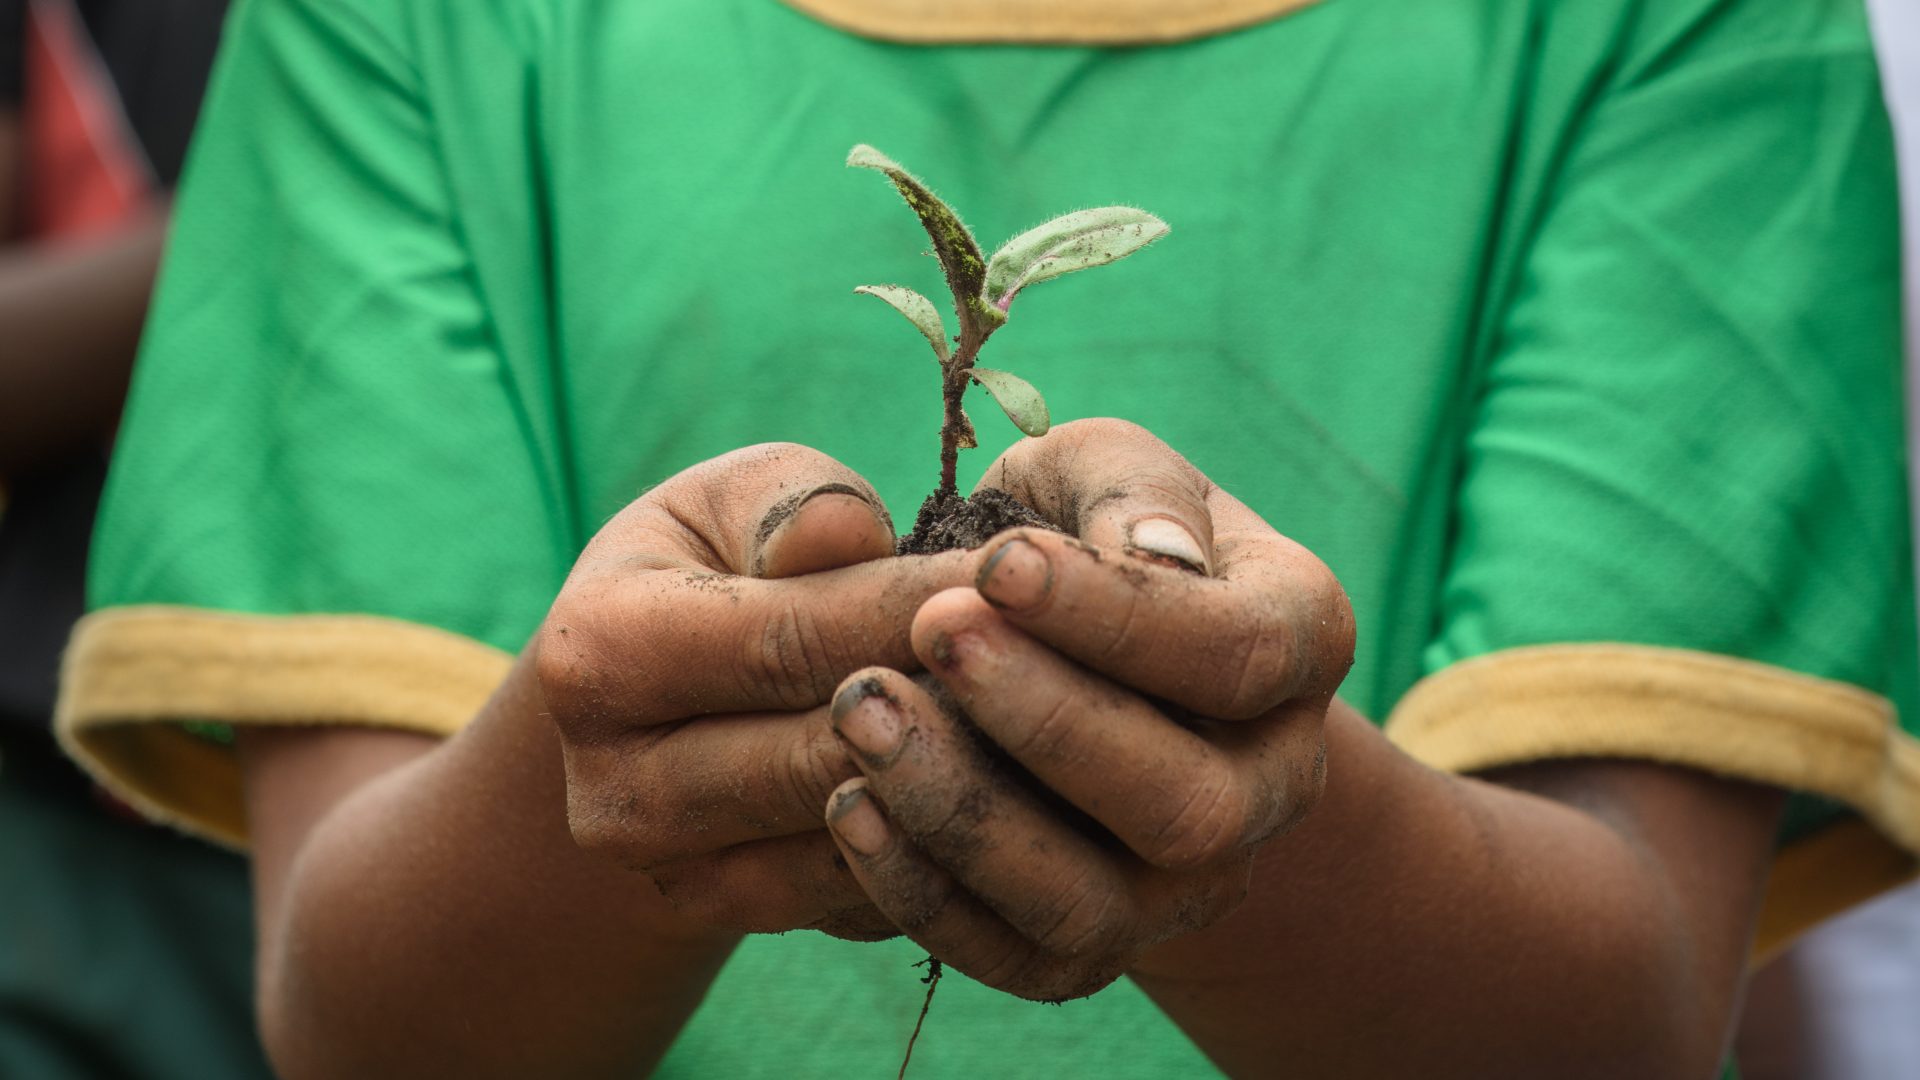 The cupped hands of a child hold a small sapling.